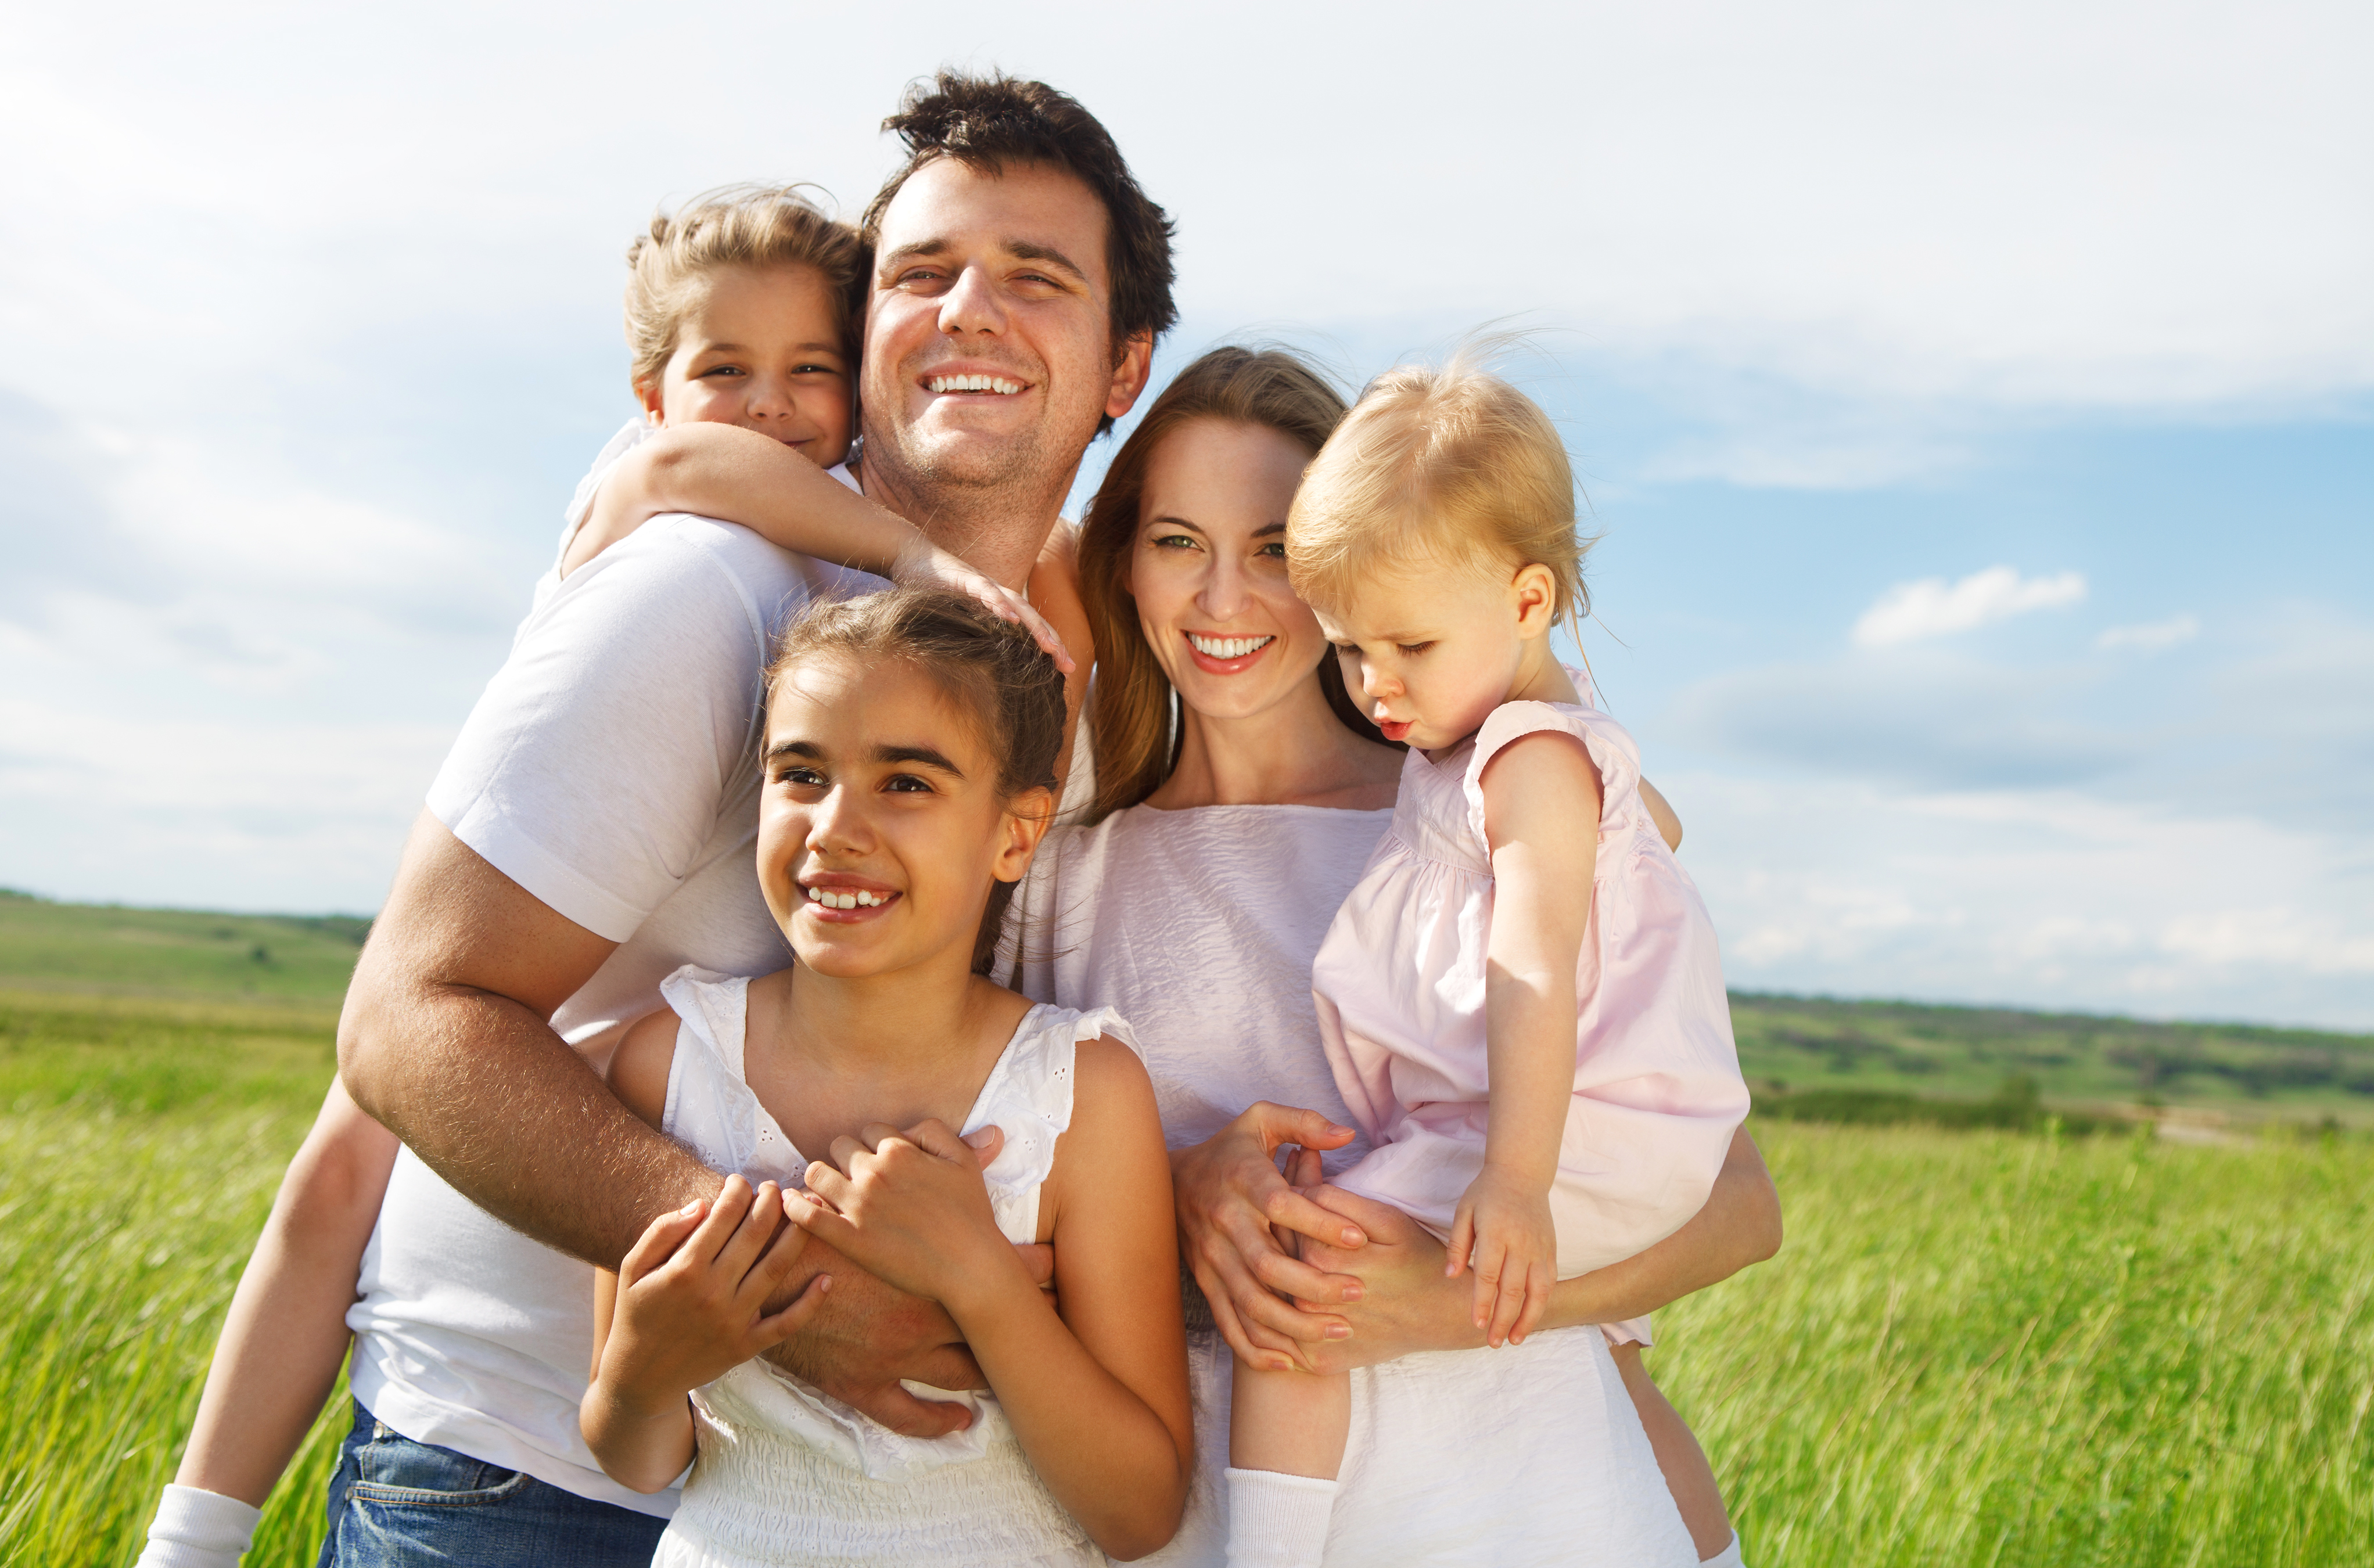 A couple with three children outdoors | Source: Shutterstock